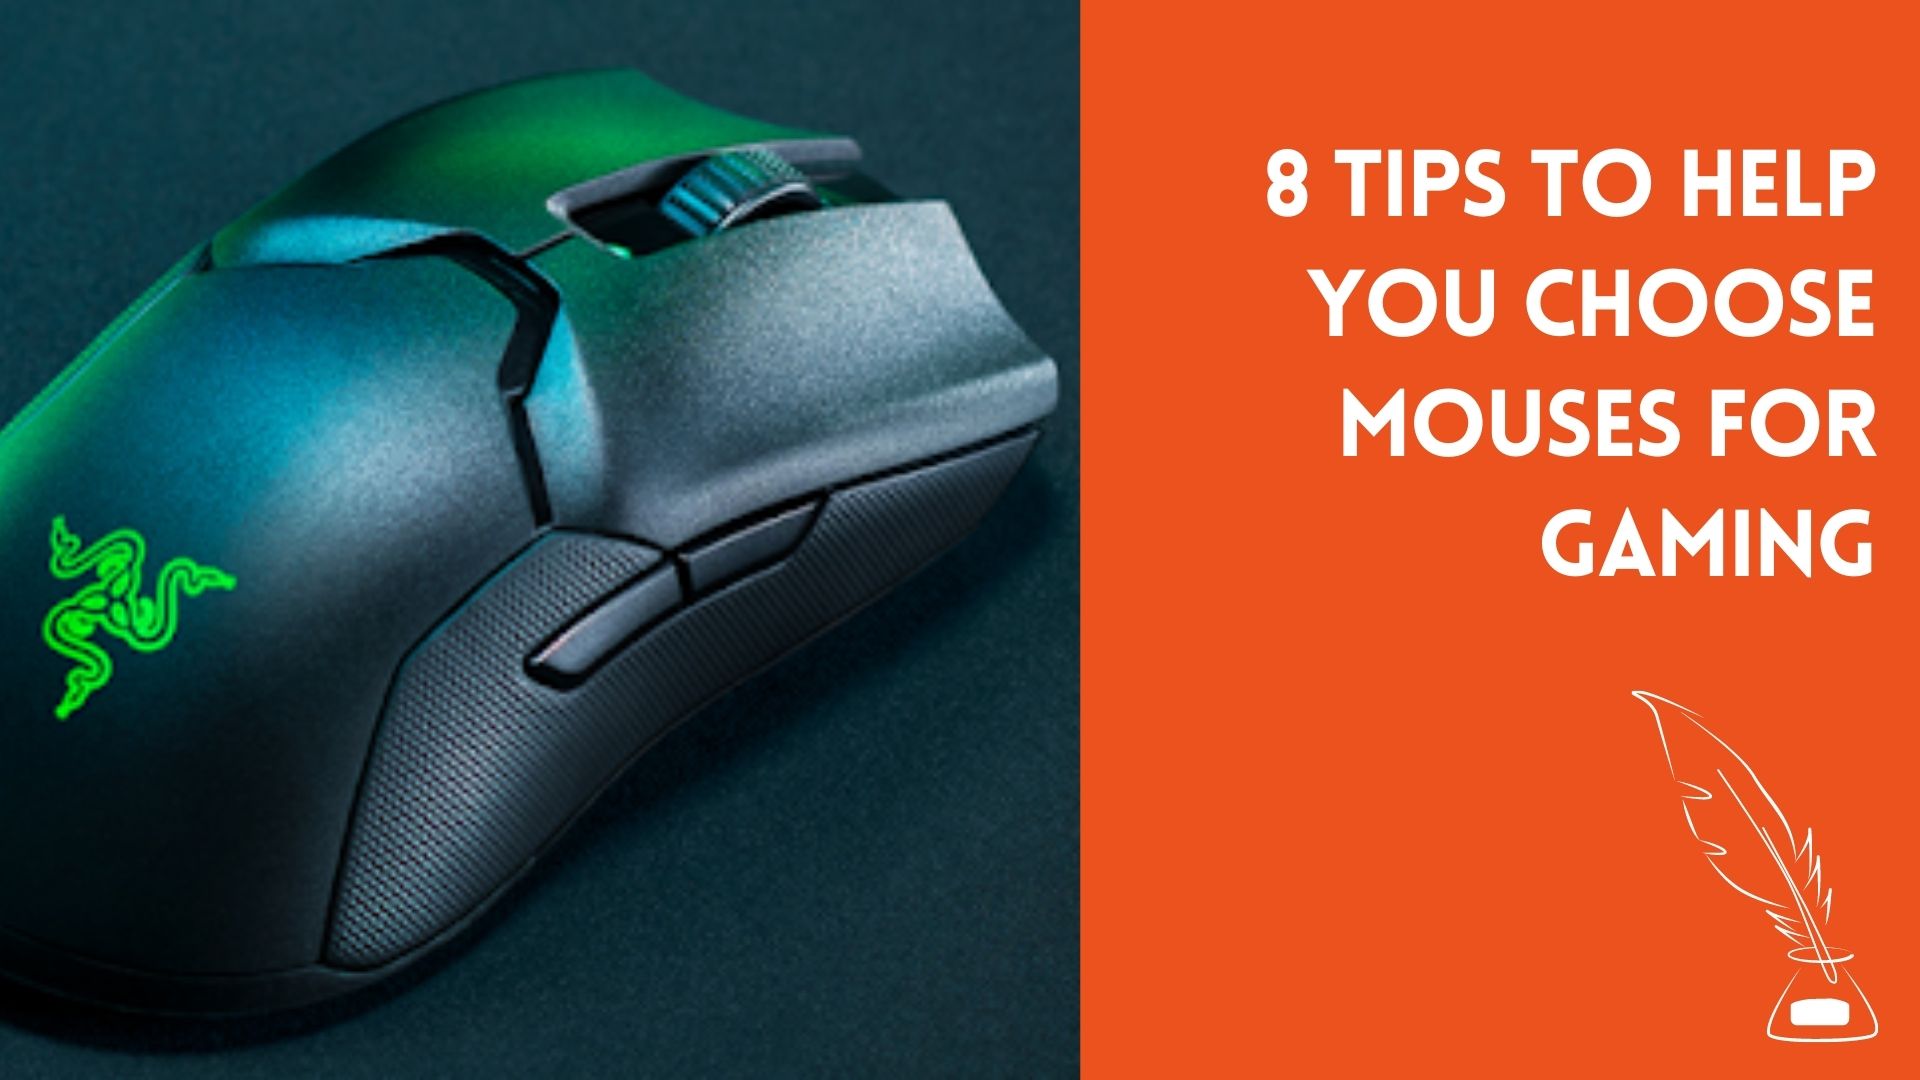 8 Tips to Help you Choose Mouses for Gaming